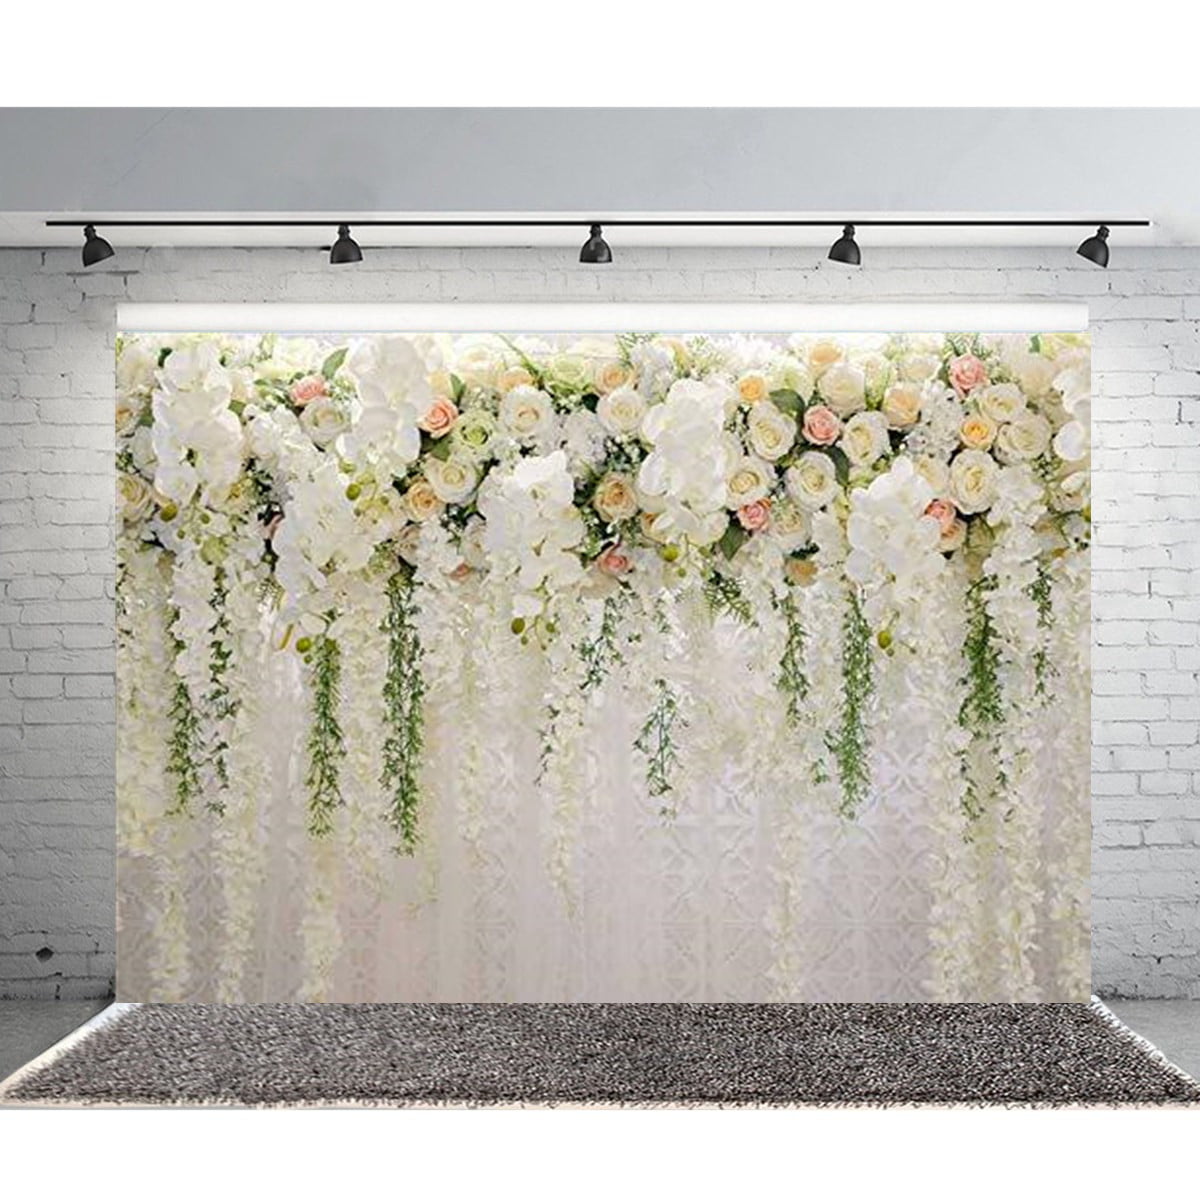 X Ft Floral Wedding Backdrop White And Pink Rose Wall Background